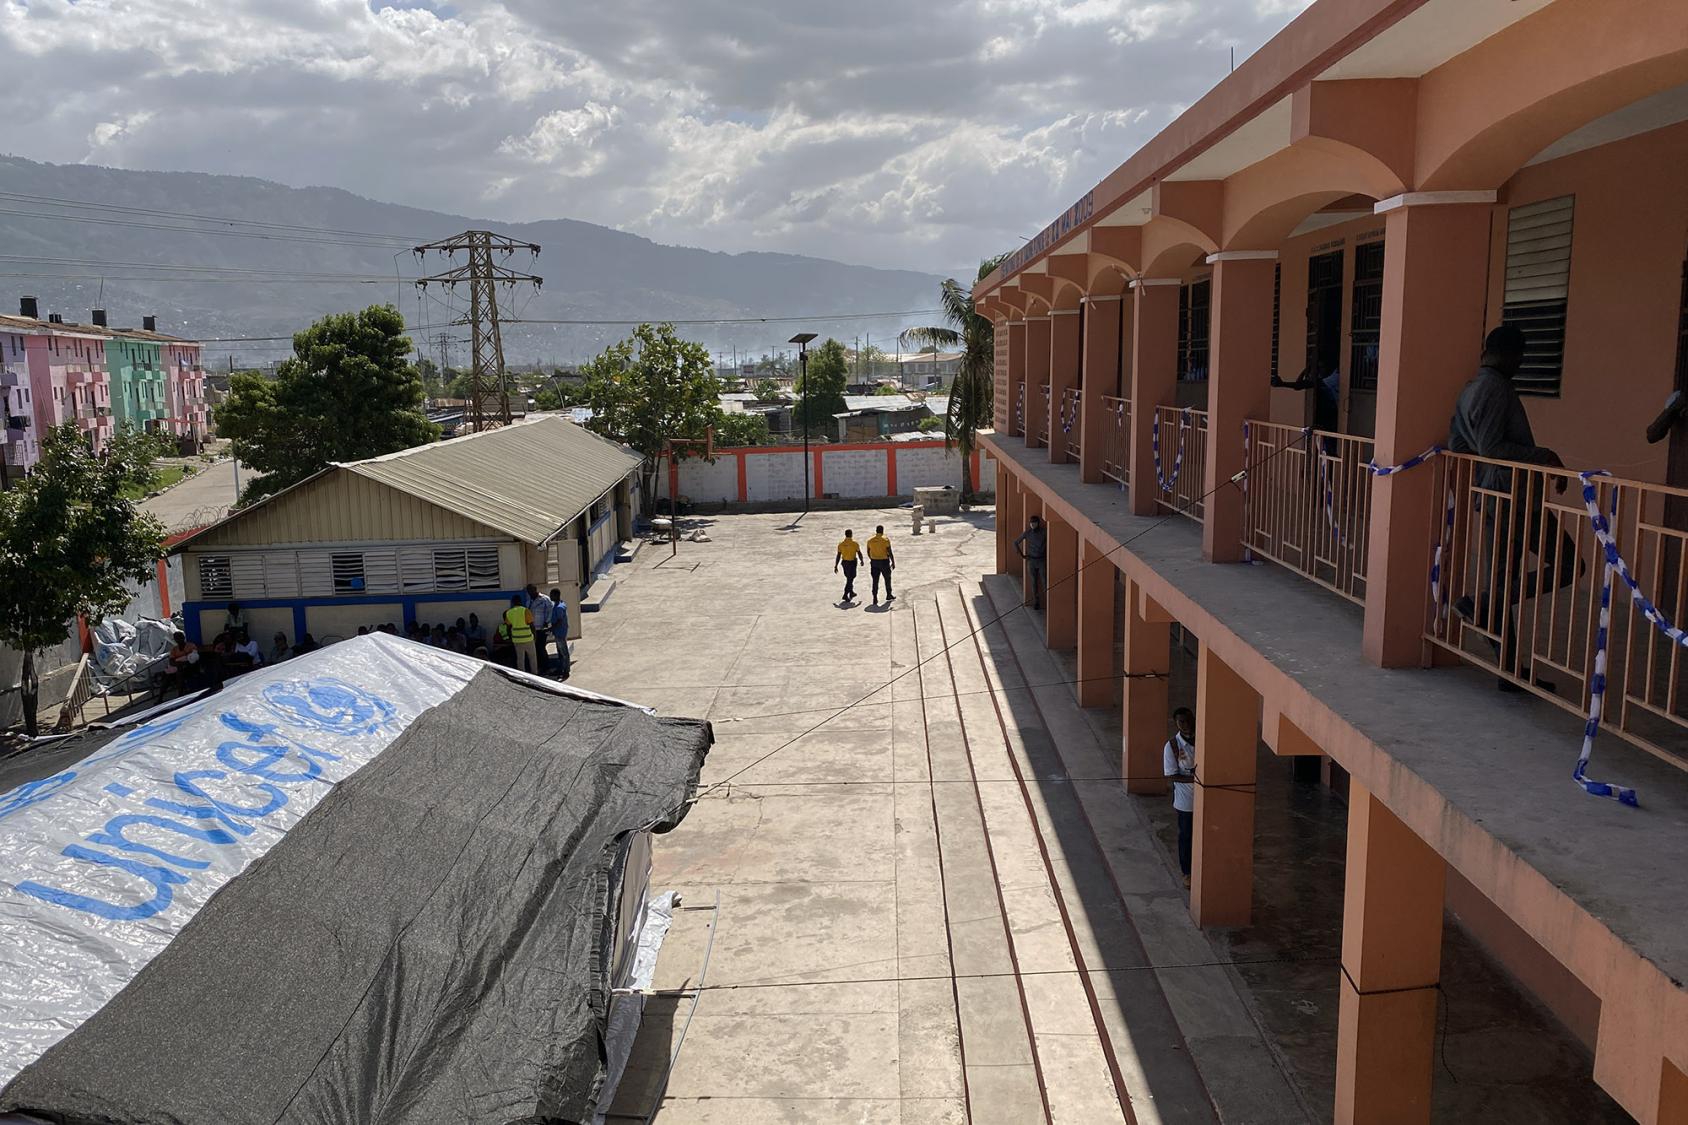 View of the inner courtyard of the Lycée National de La Saline, Haiti.